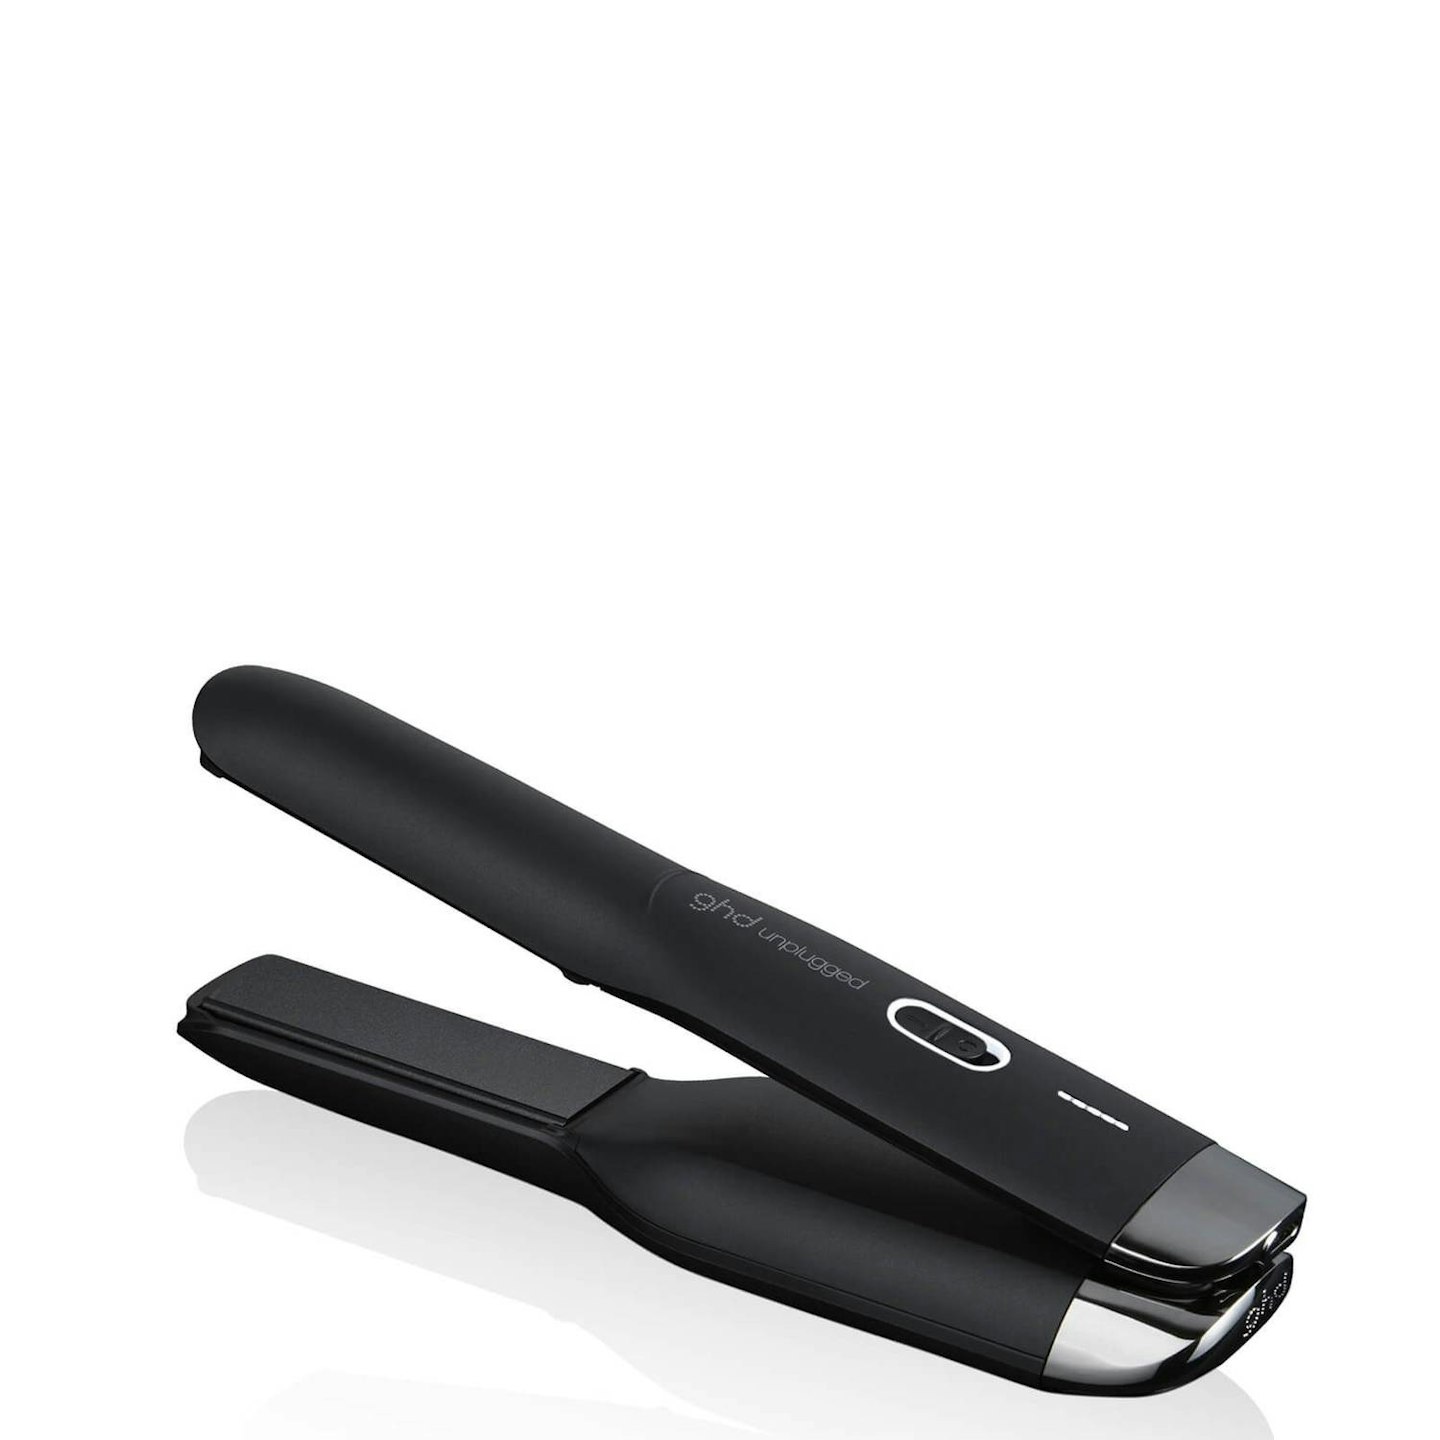 Best cordless hair styler for travelling: ghd